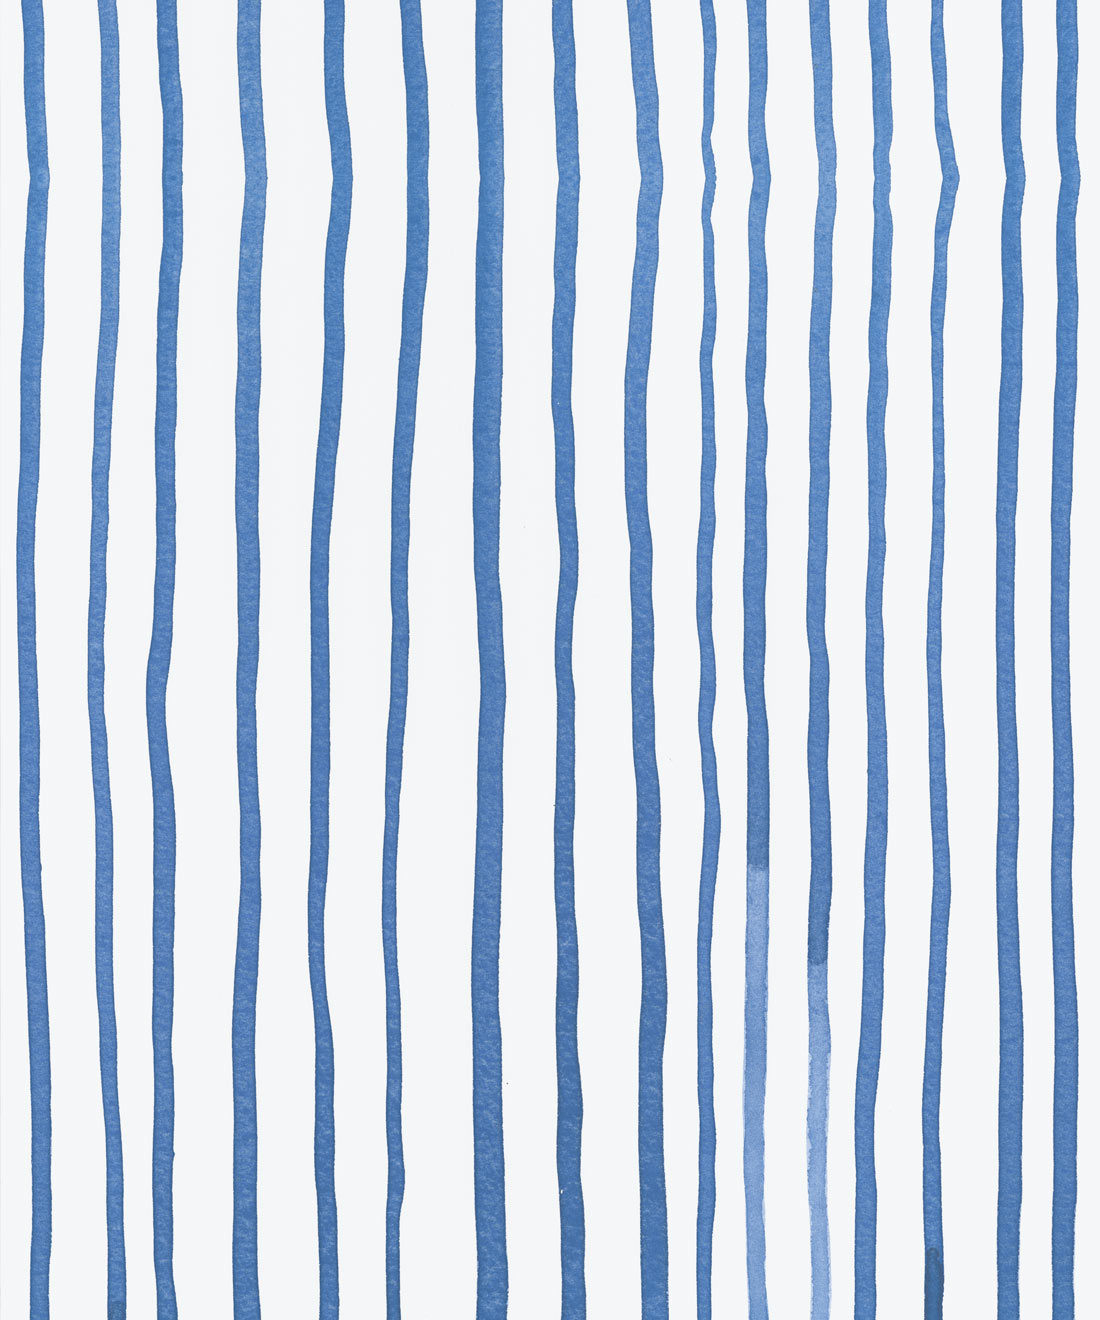 Retro blue and yellow stripes striped wallpaper  TenStickers